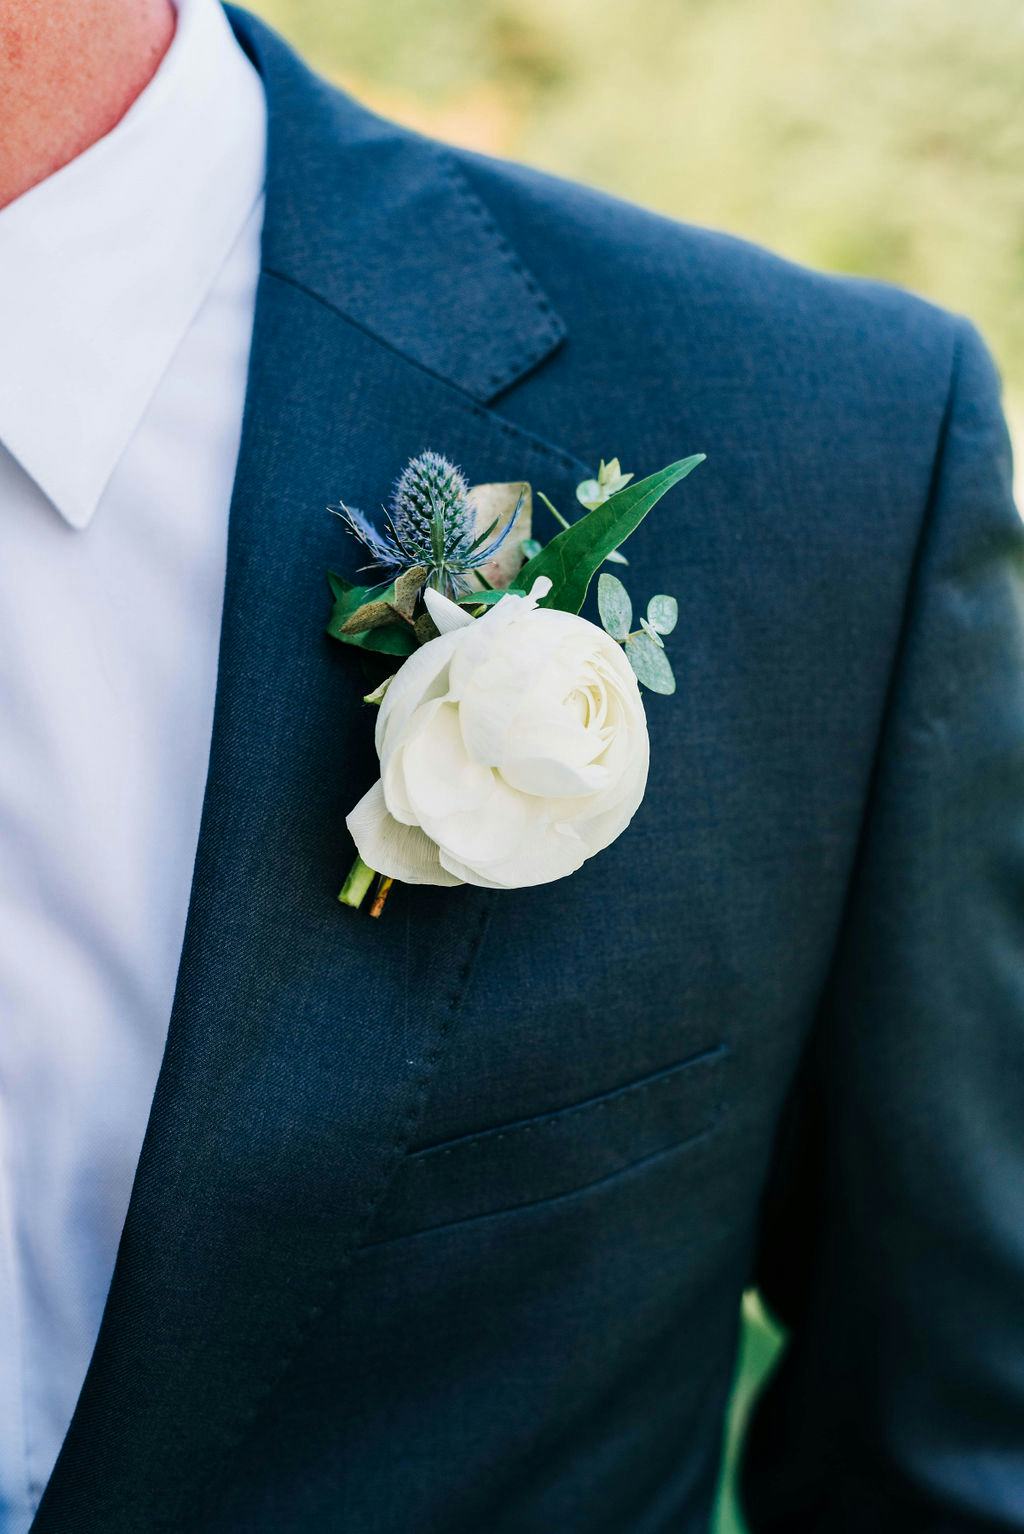 Achieve soul fireworks How to Pin a Boutonniere in 3 Easy Steps | SuitShop